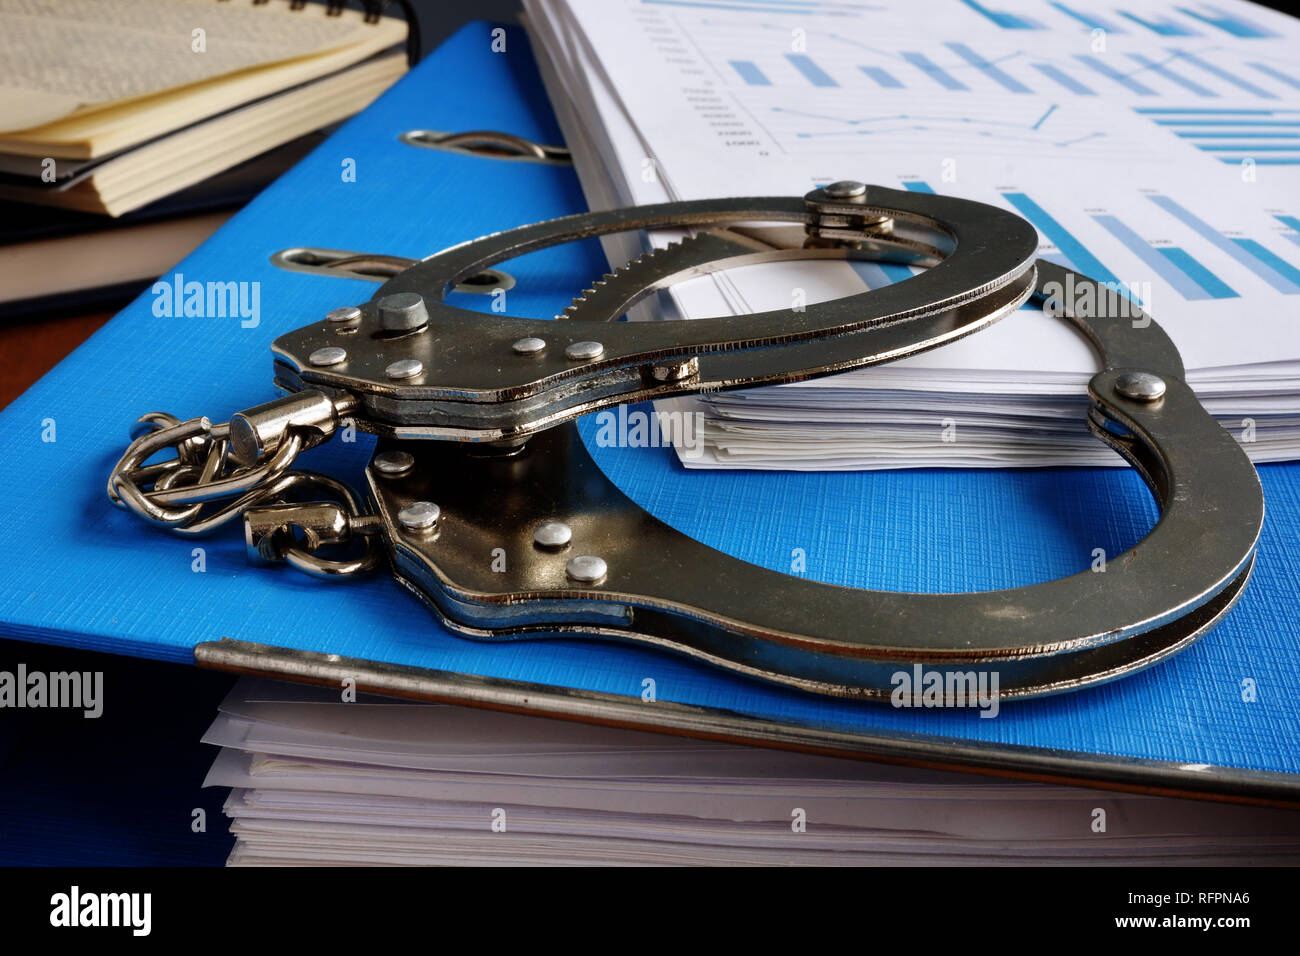 Tax evasion. Handcuffs and pile of financial papers. Stock Photo